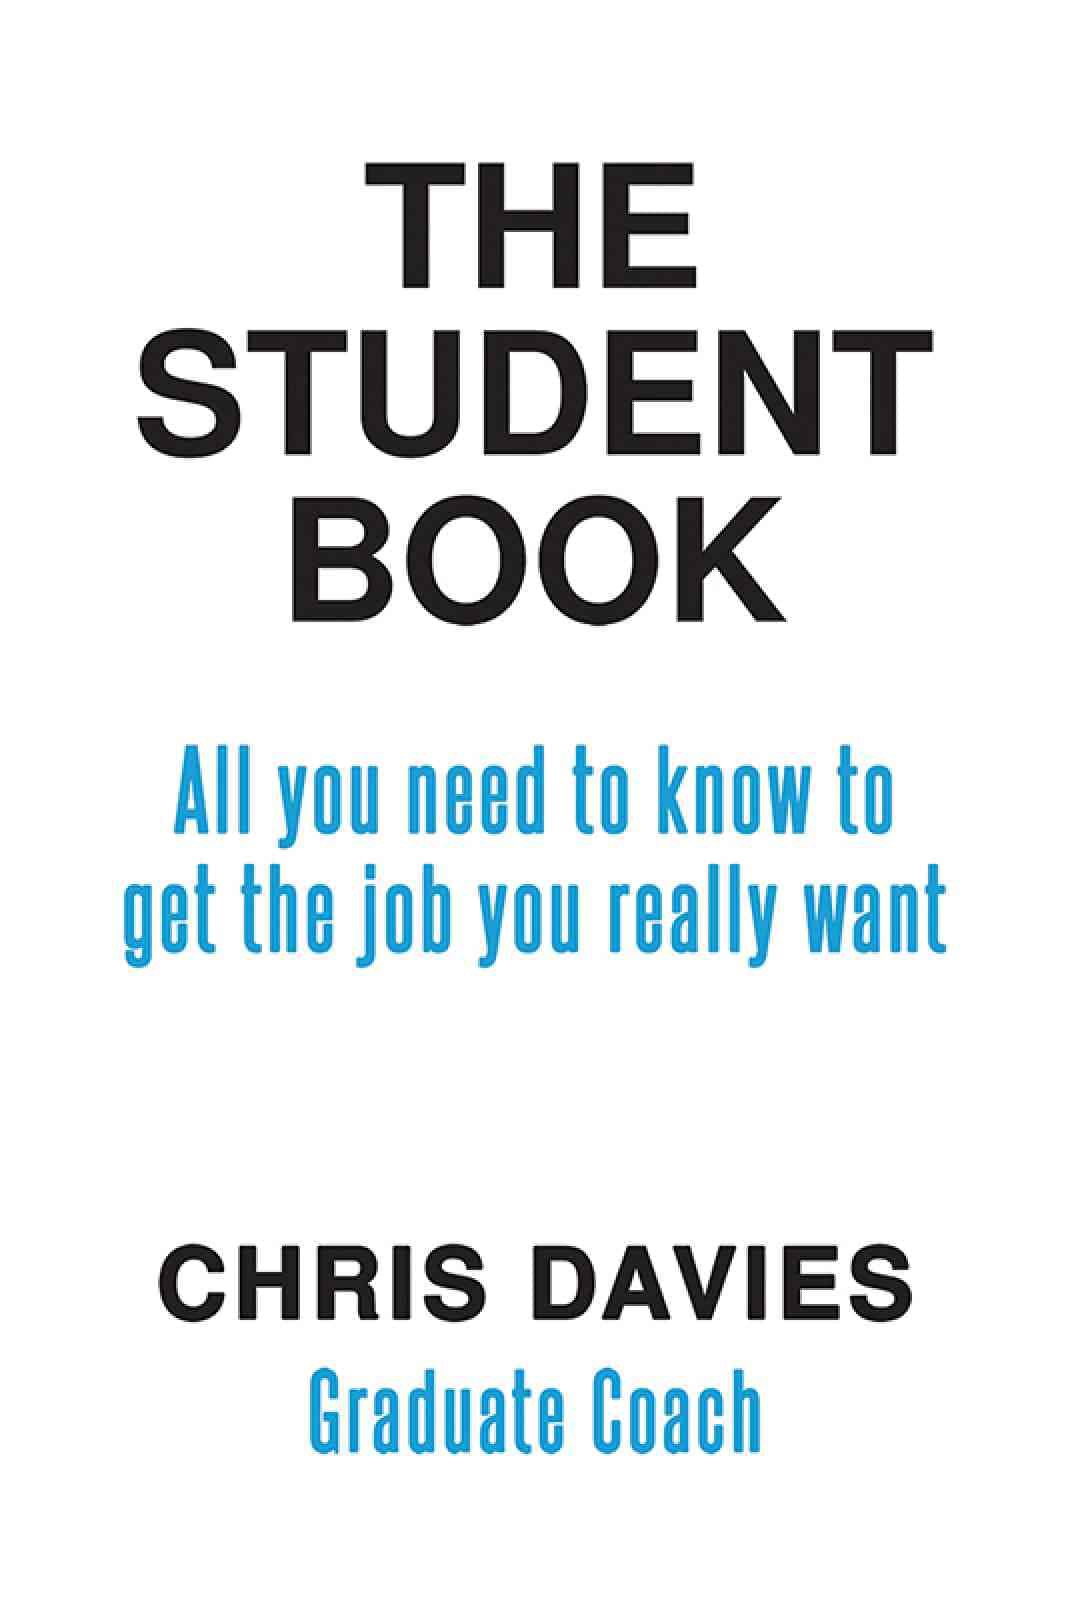 Austin Macauley’s Publication The Student Book by Chris Davies Was Featured on Boove.co.uk